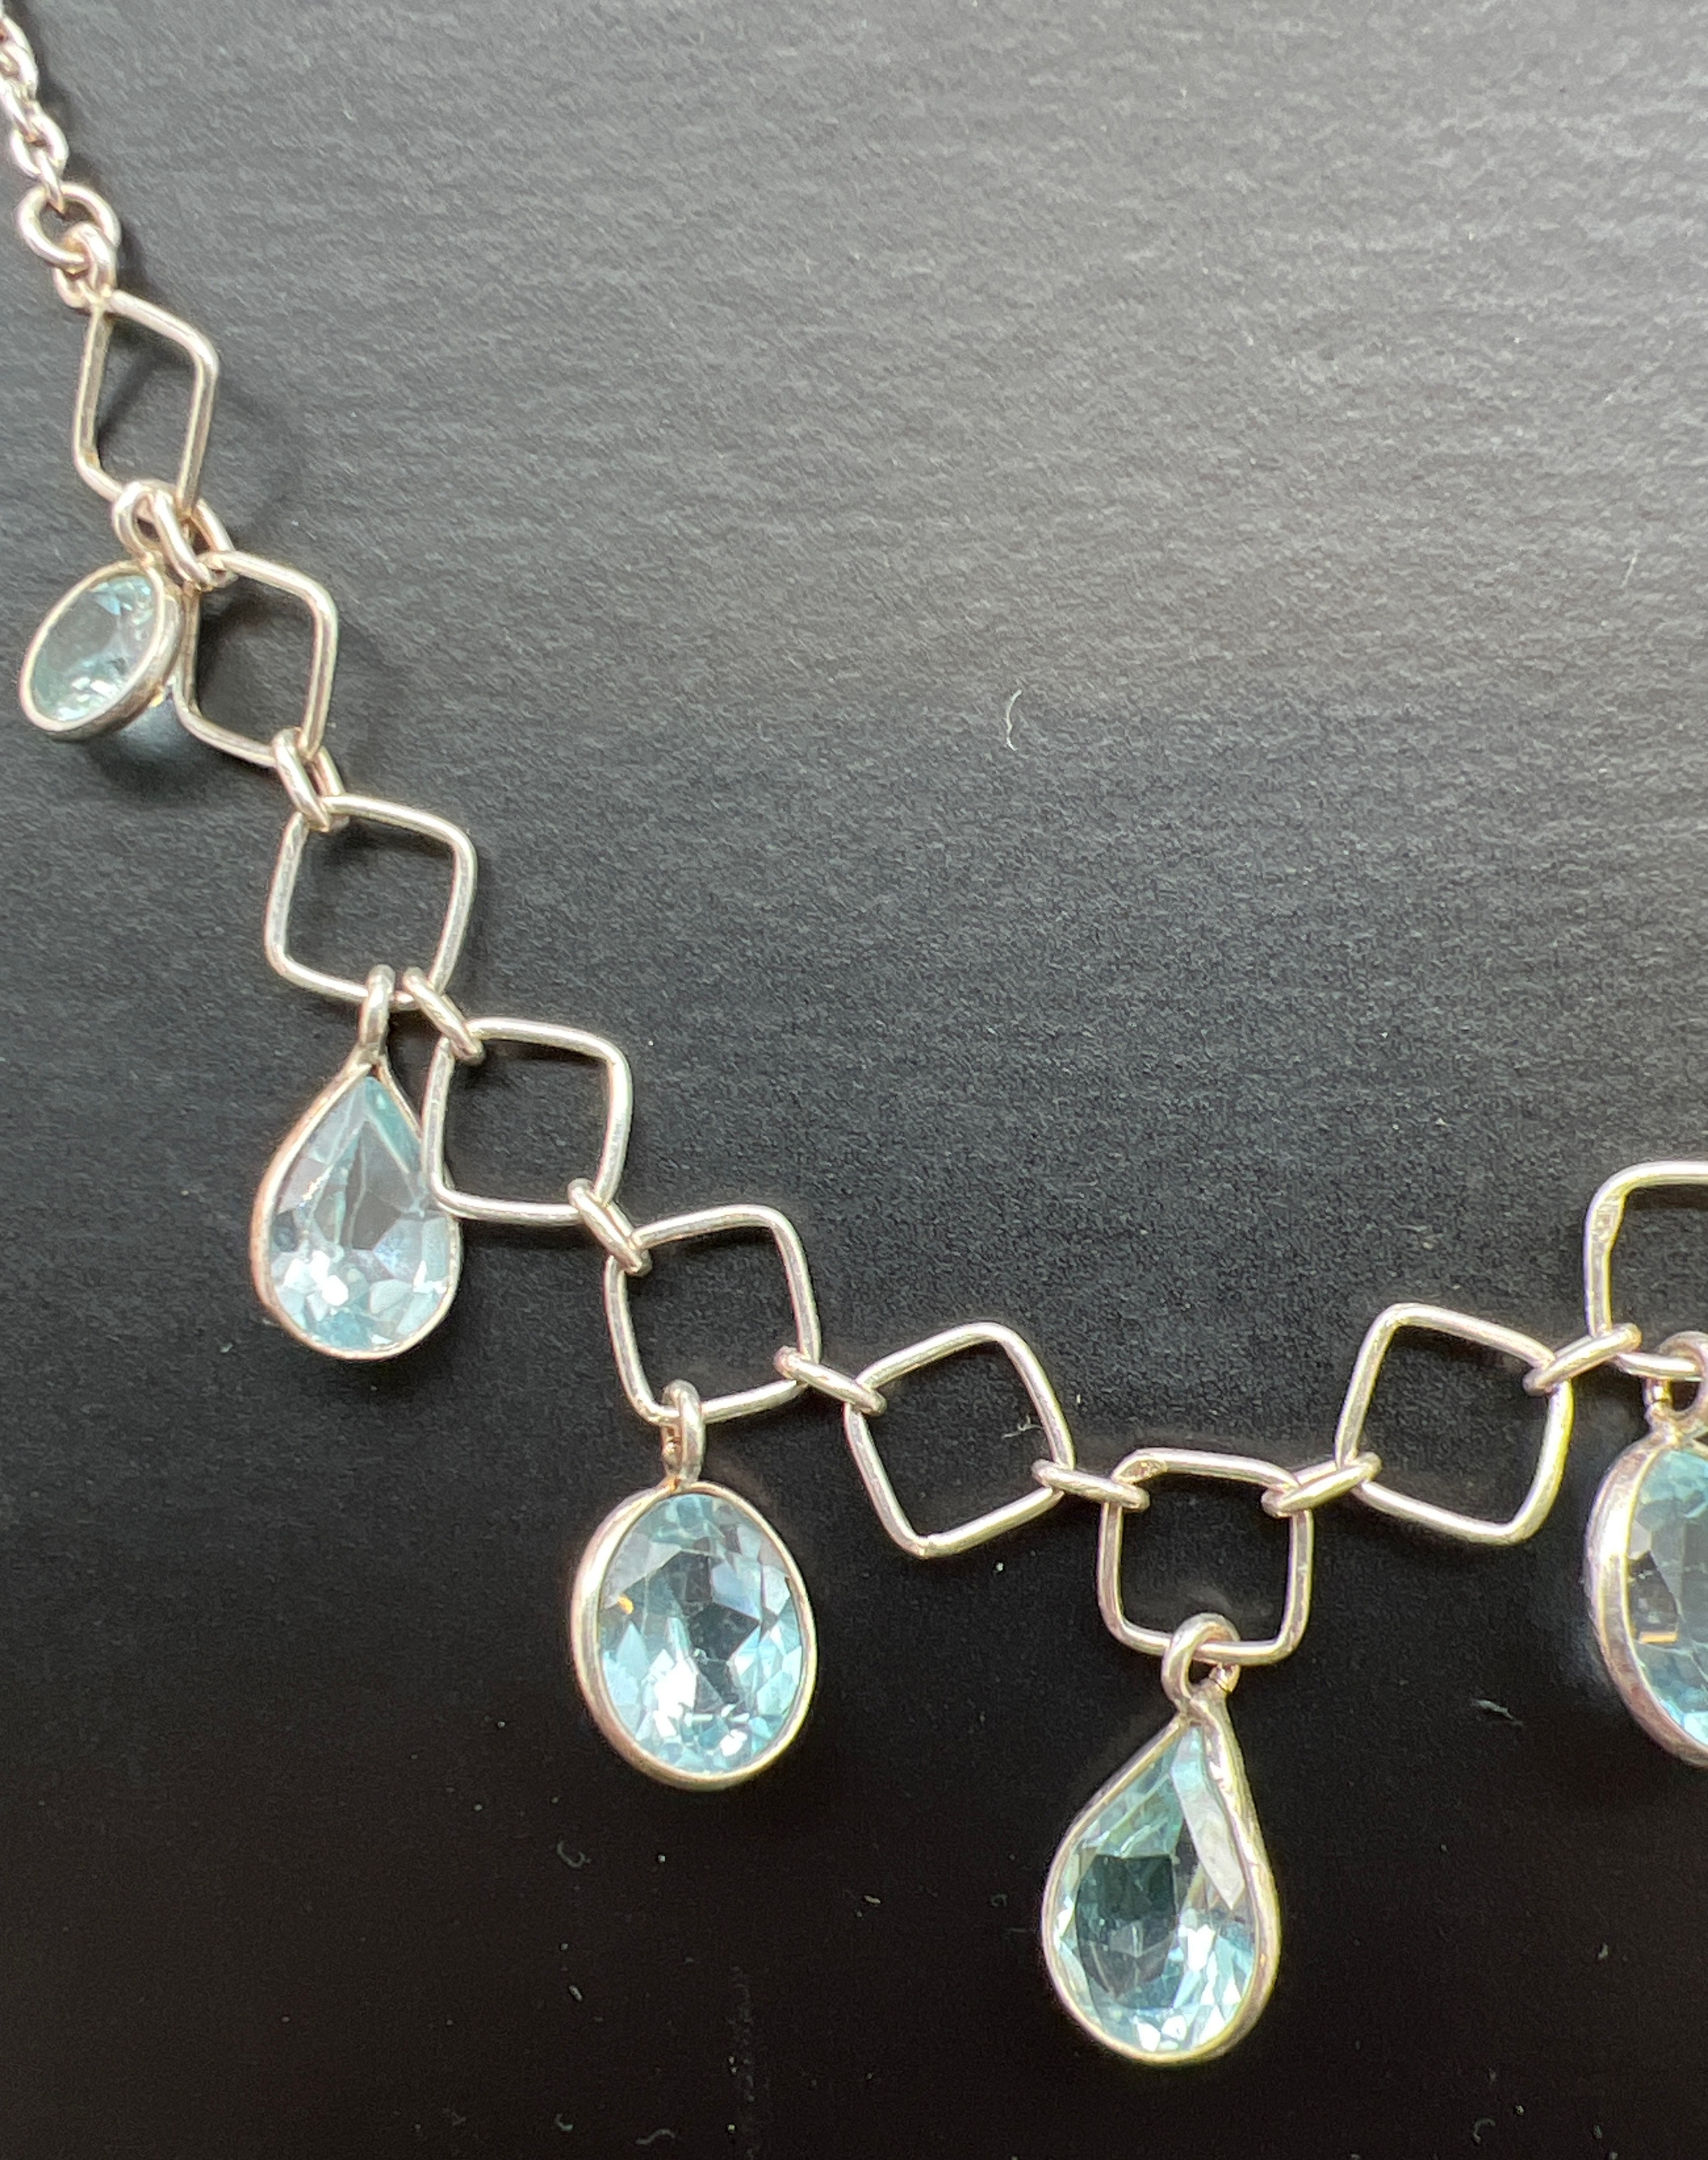 A modern design 18 inch fixed pendant silver necklace with round, oval and teardrop cut blue topaz - Image 2 of 2